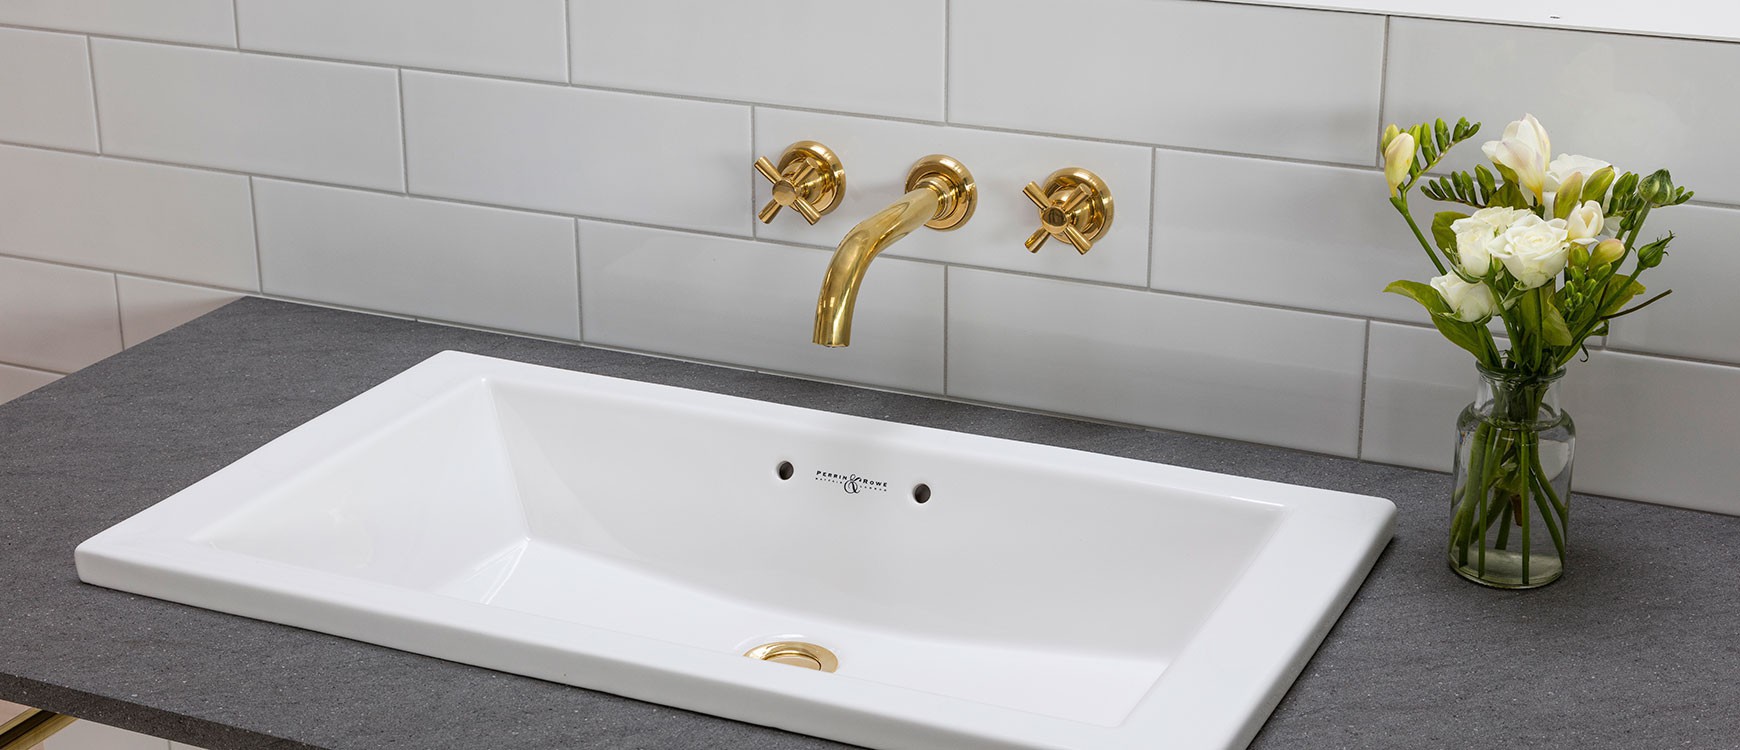 Best Quality Basin Taps Buy Bathroom Taps In Australia Online The English Tapware Company